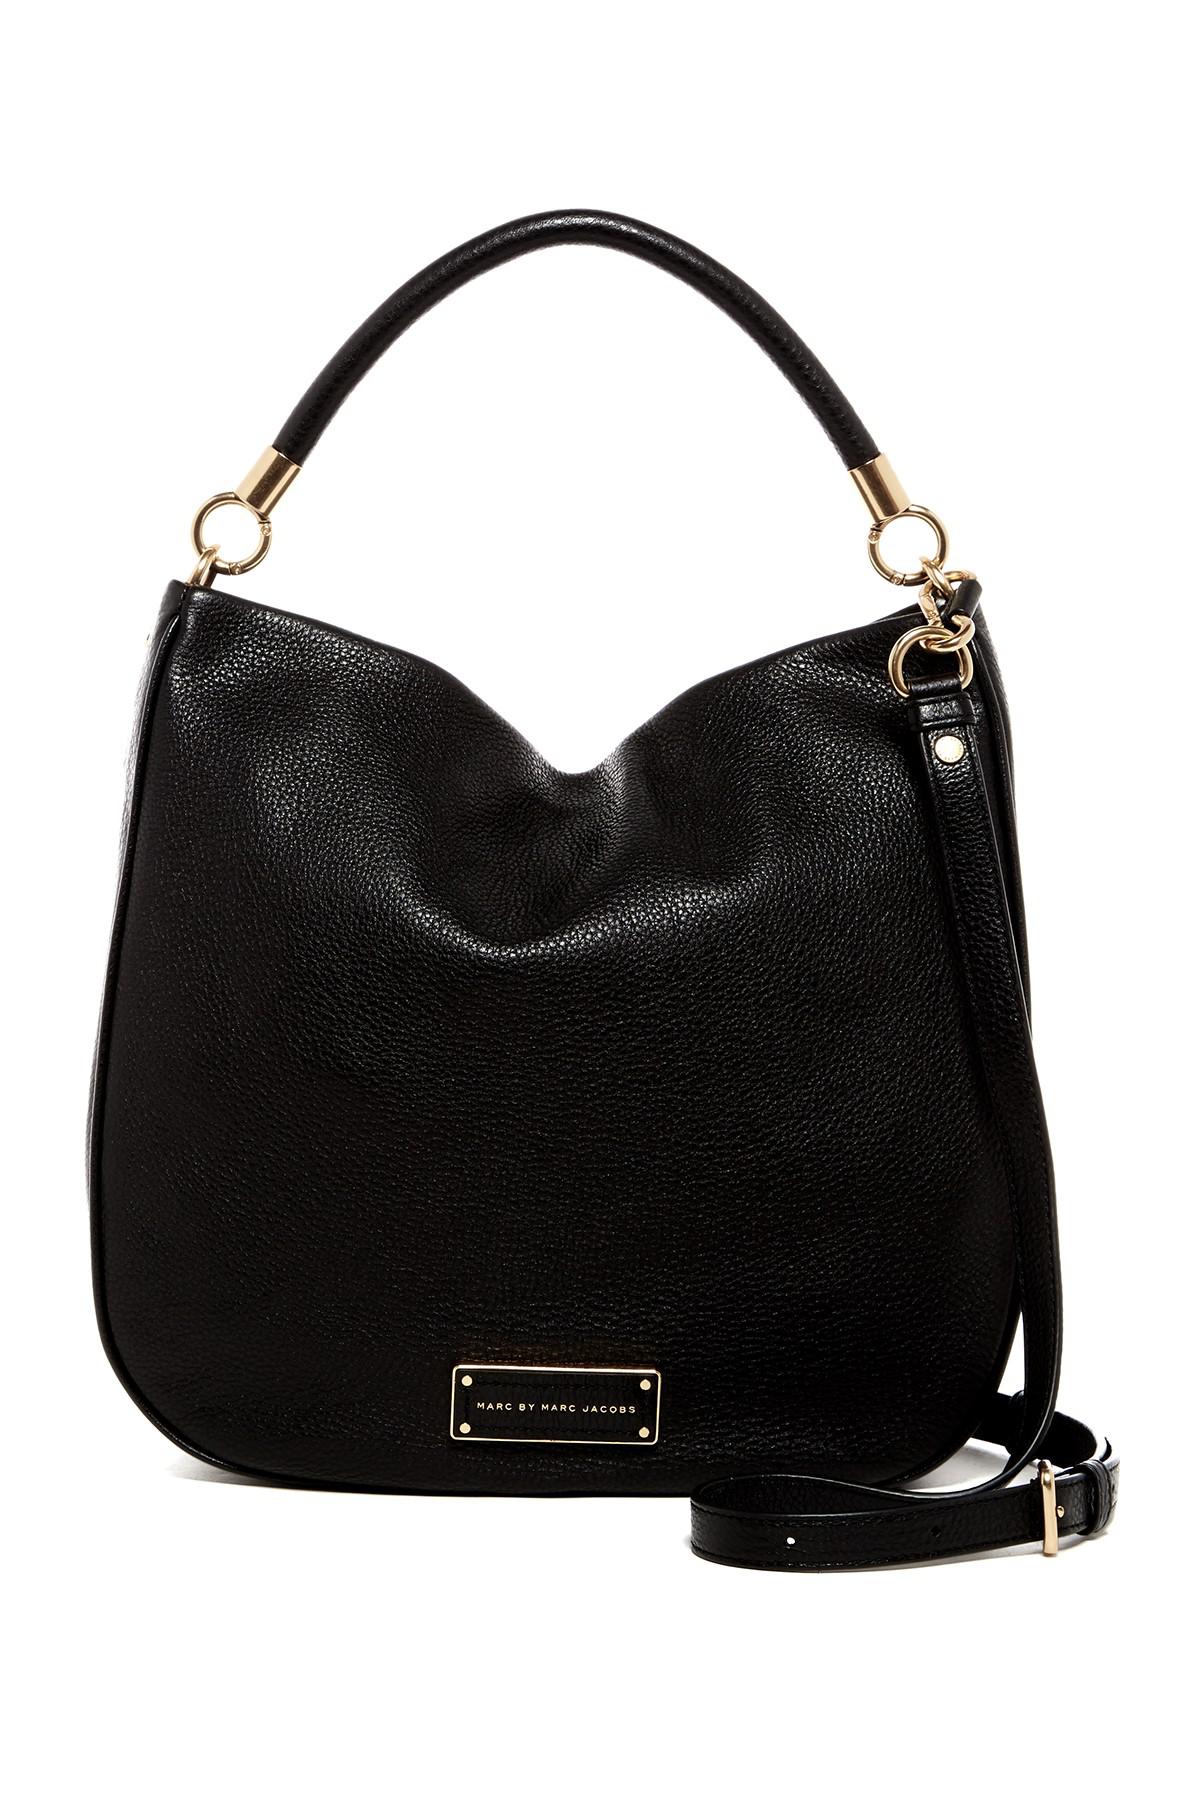 Marc jacobs Leather Hobo in Black | Lyst